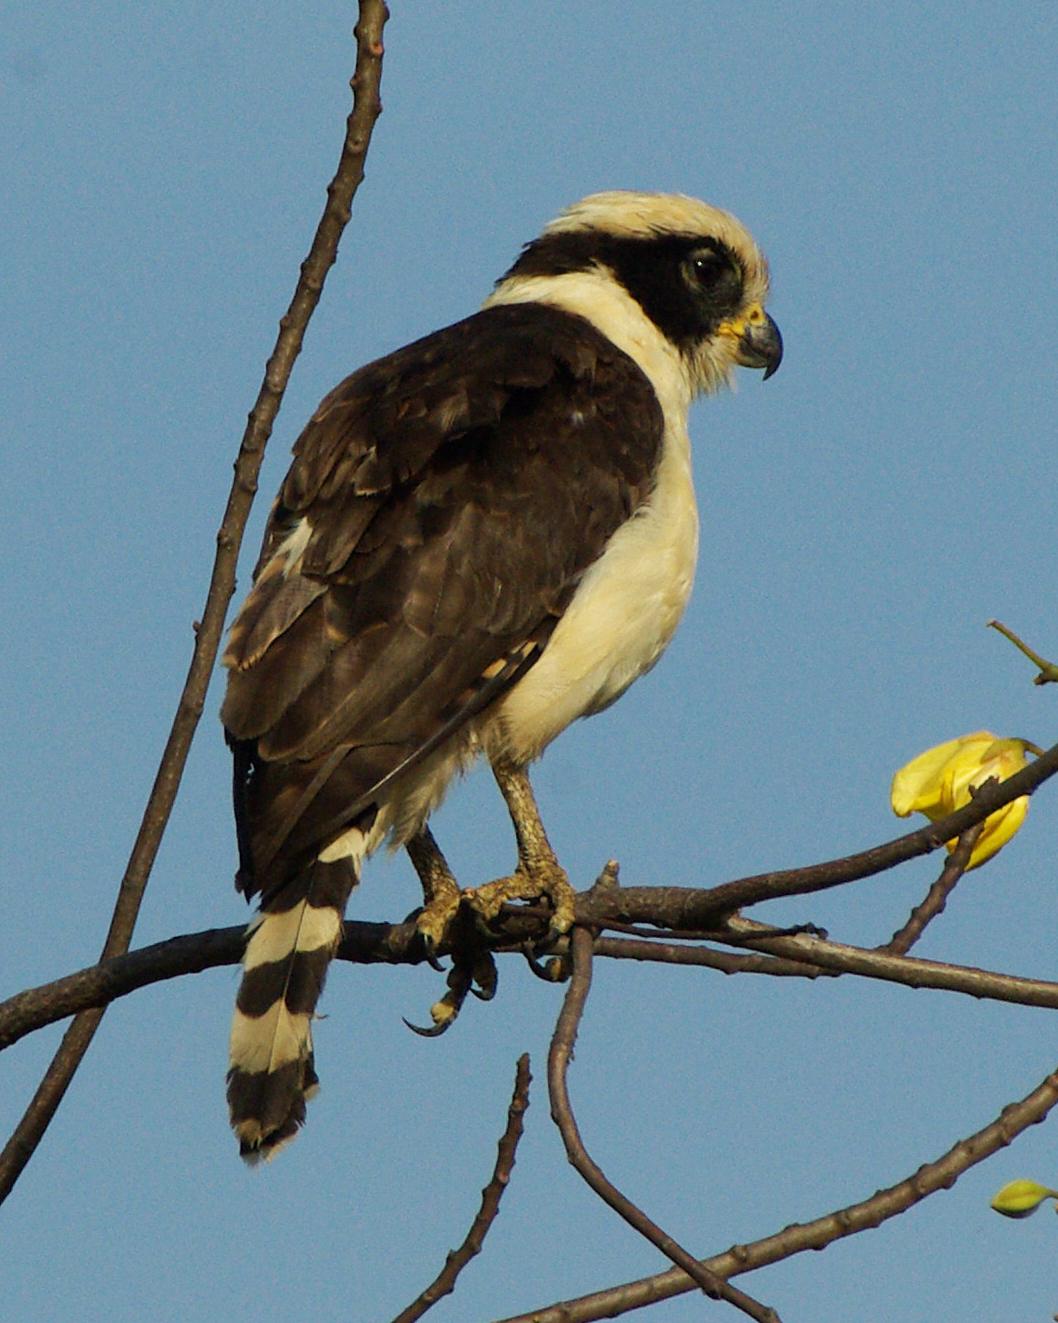 Laughing Falcon Photo by Robert Polkinghorn